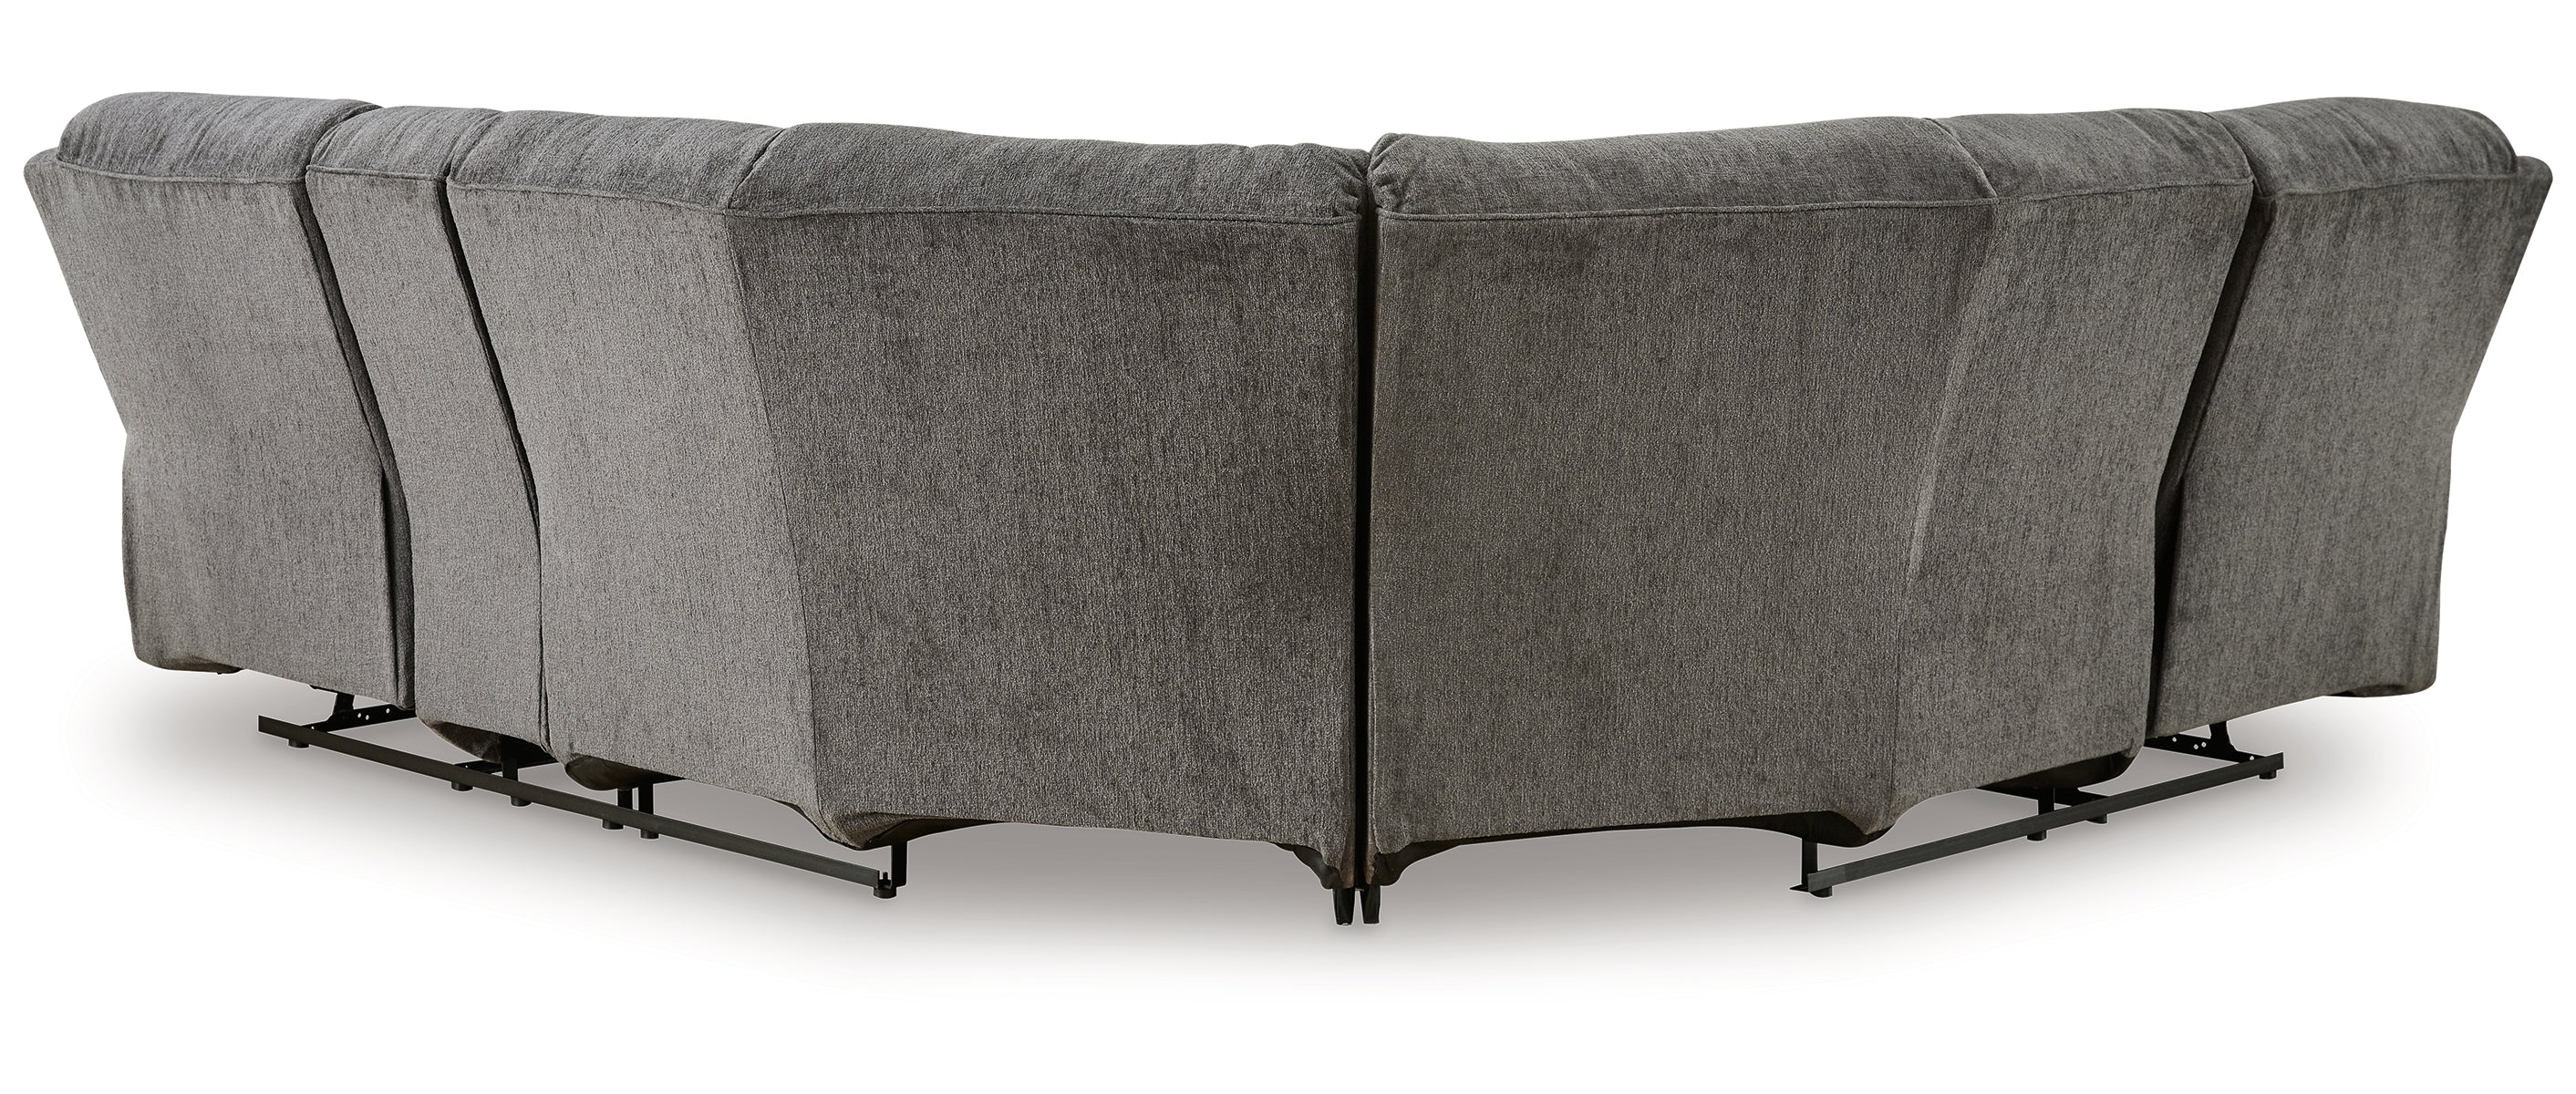 Museum 2-Piece Reclining Sectional